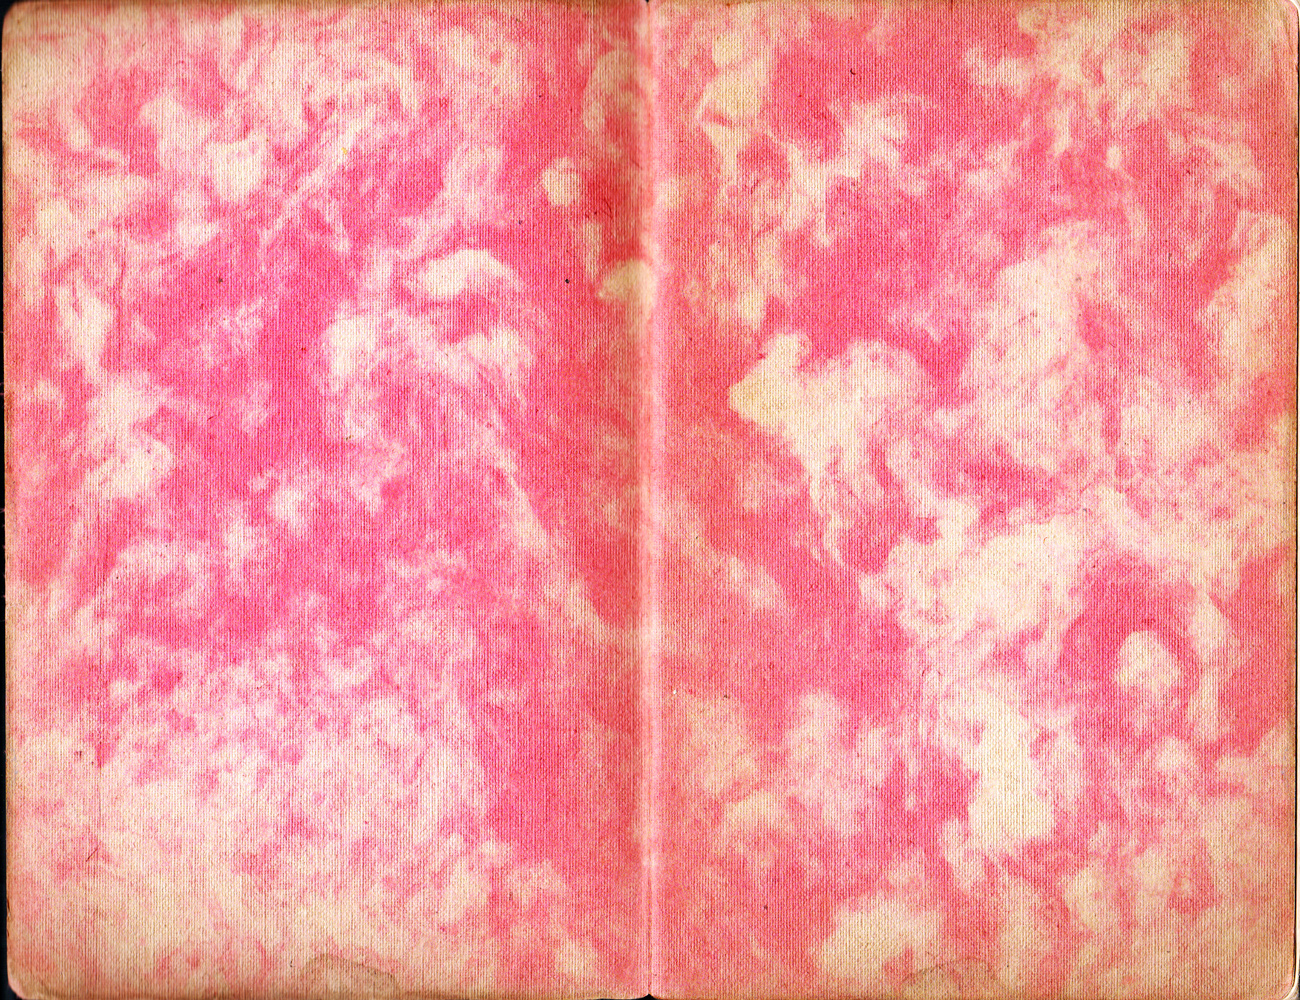 endpapers 2